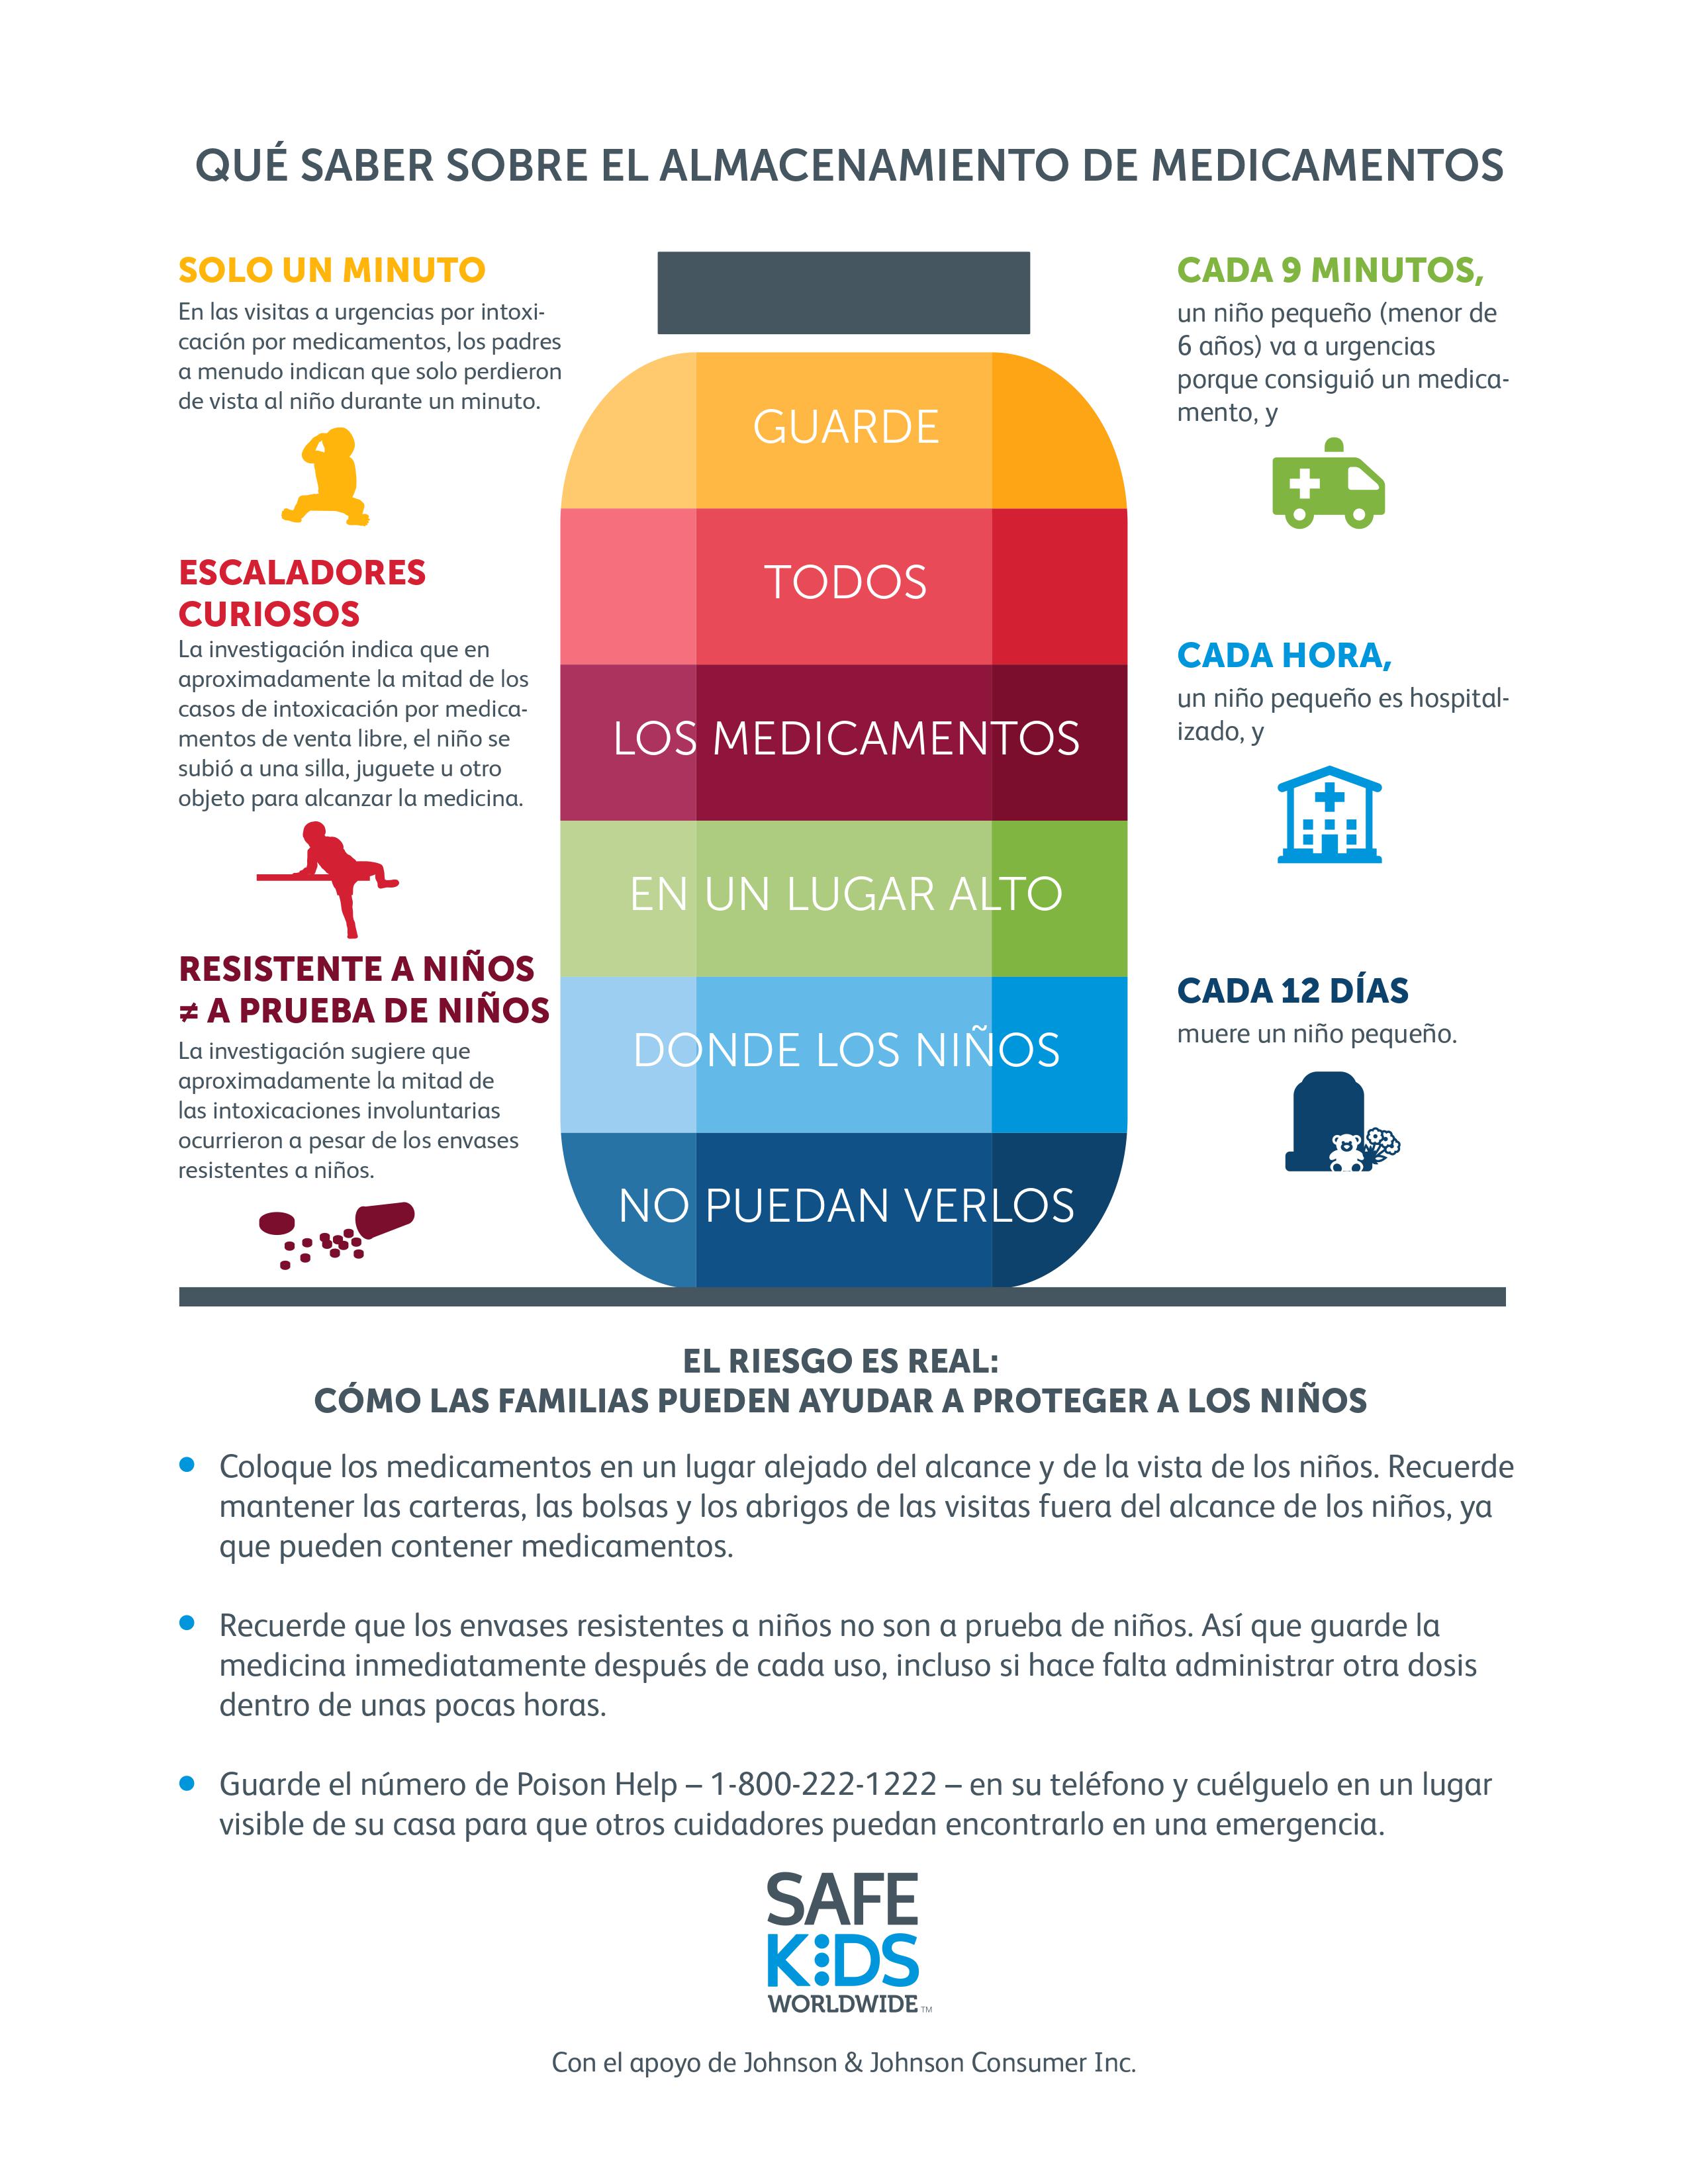 Medication Infographic 2018 in spanish